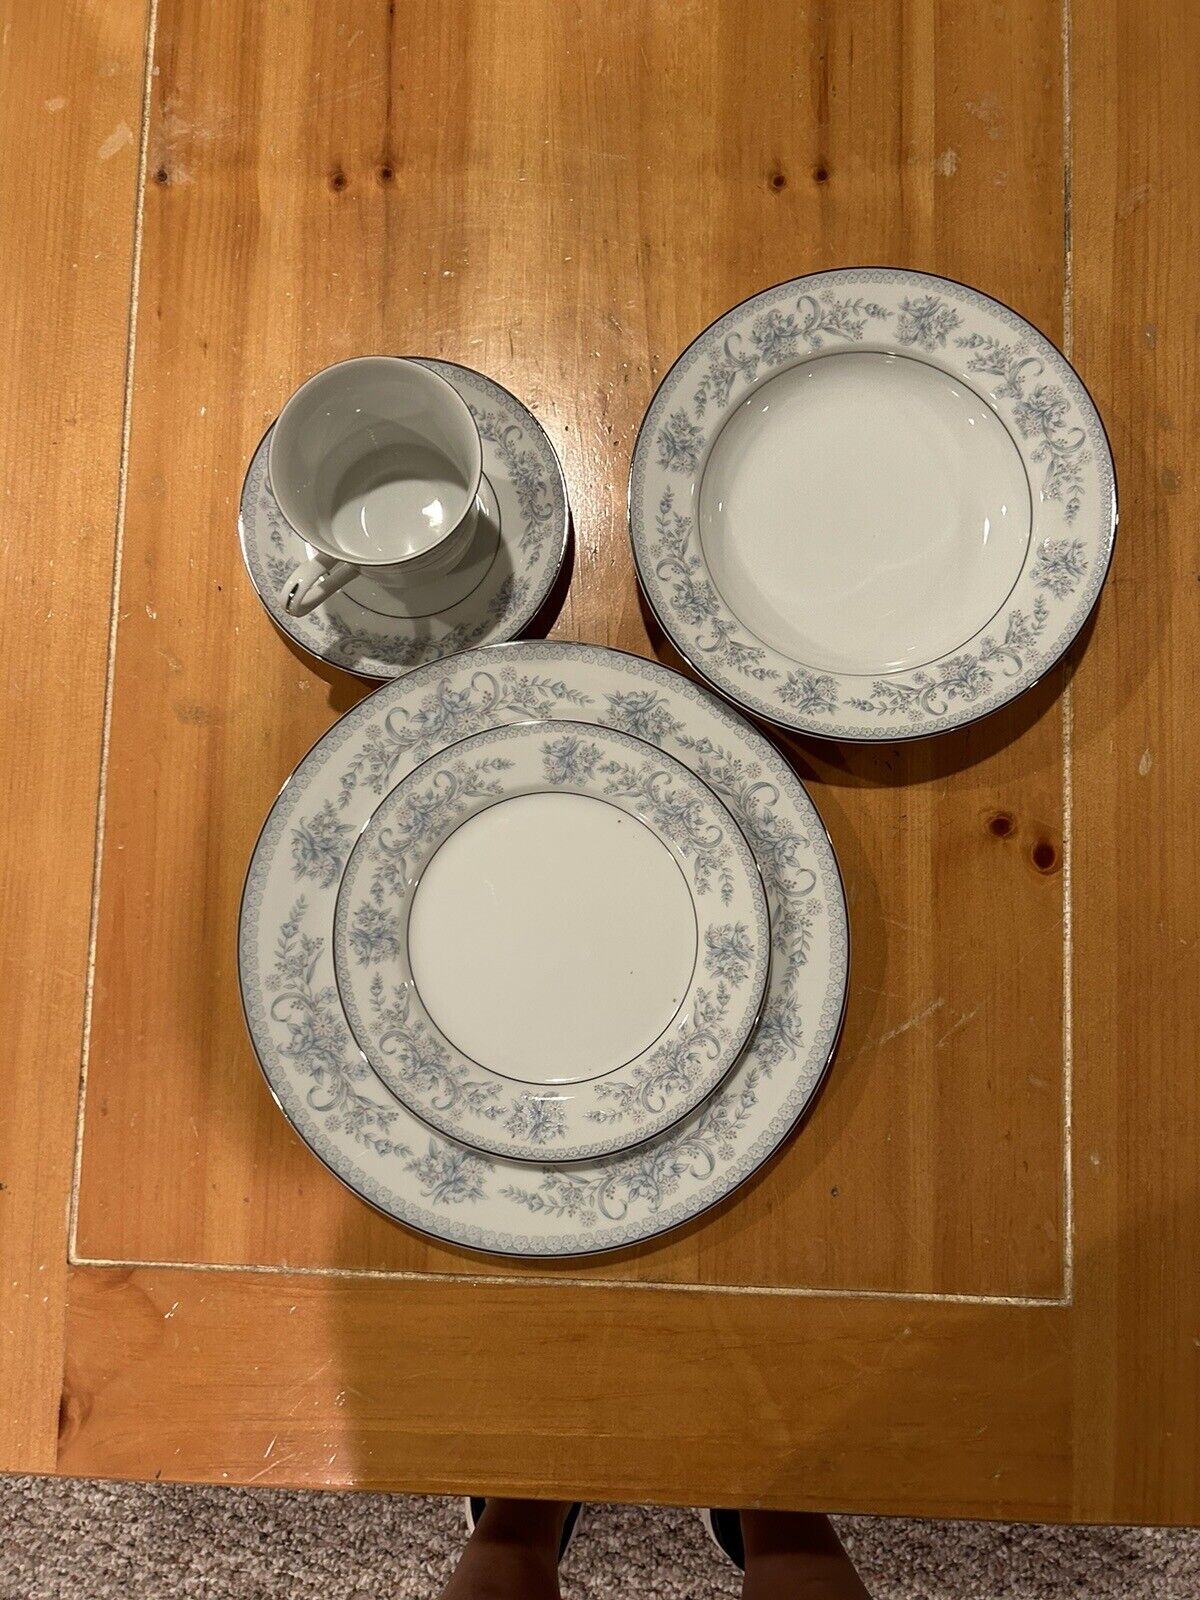 Mikasa Dresden Rose Fine China  (L9009) -13 place settings, 5 piece each +extras